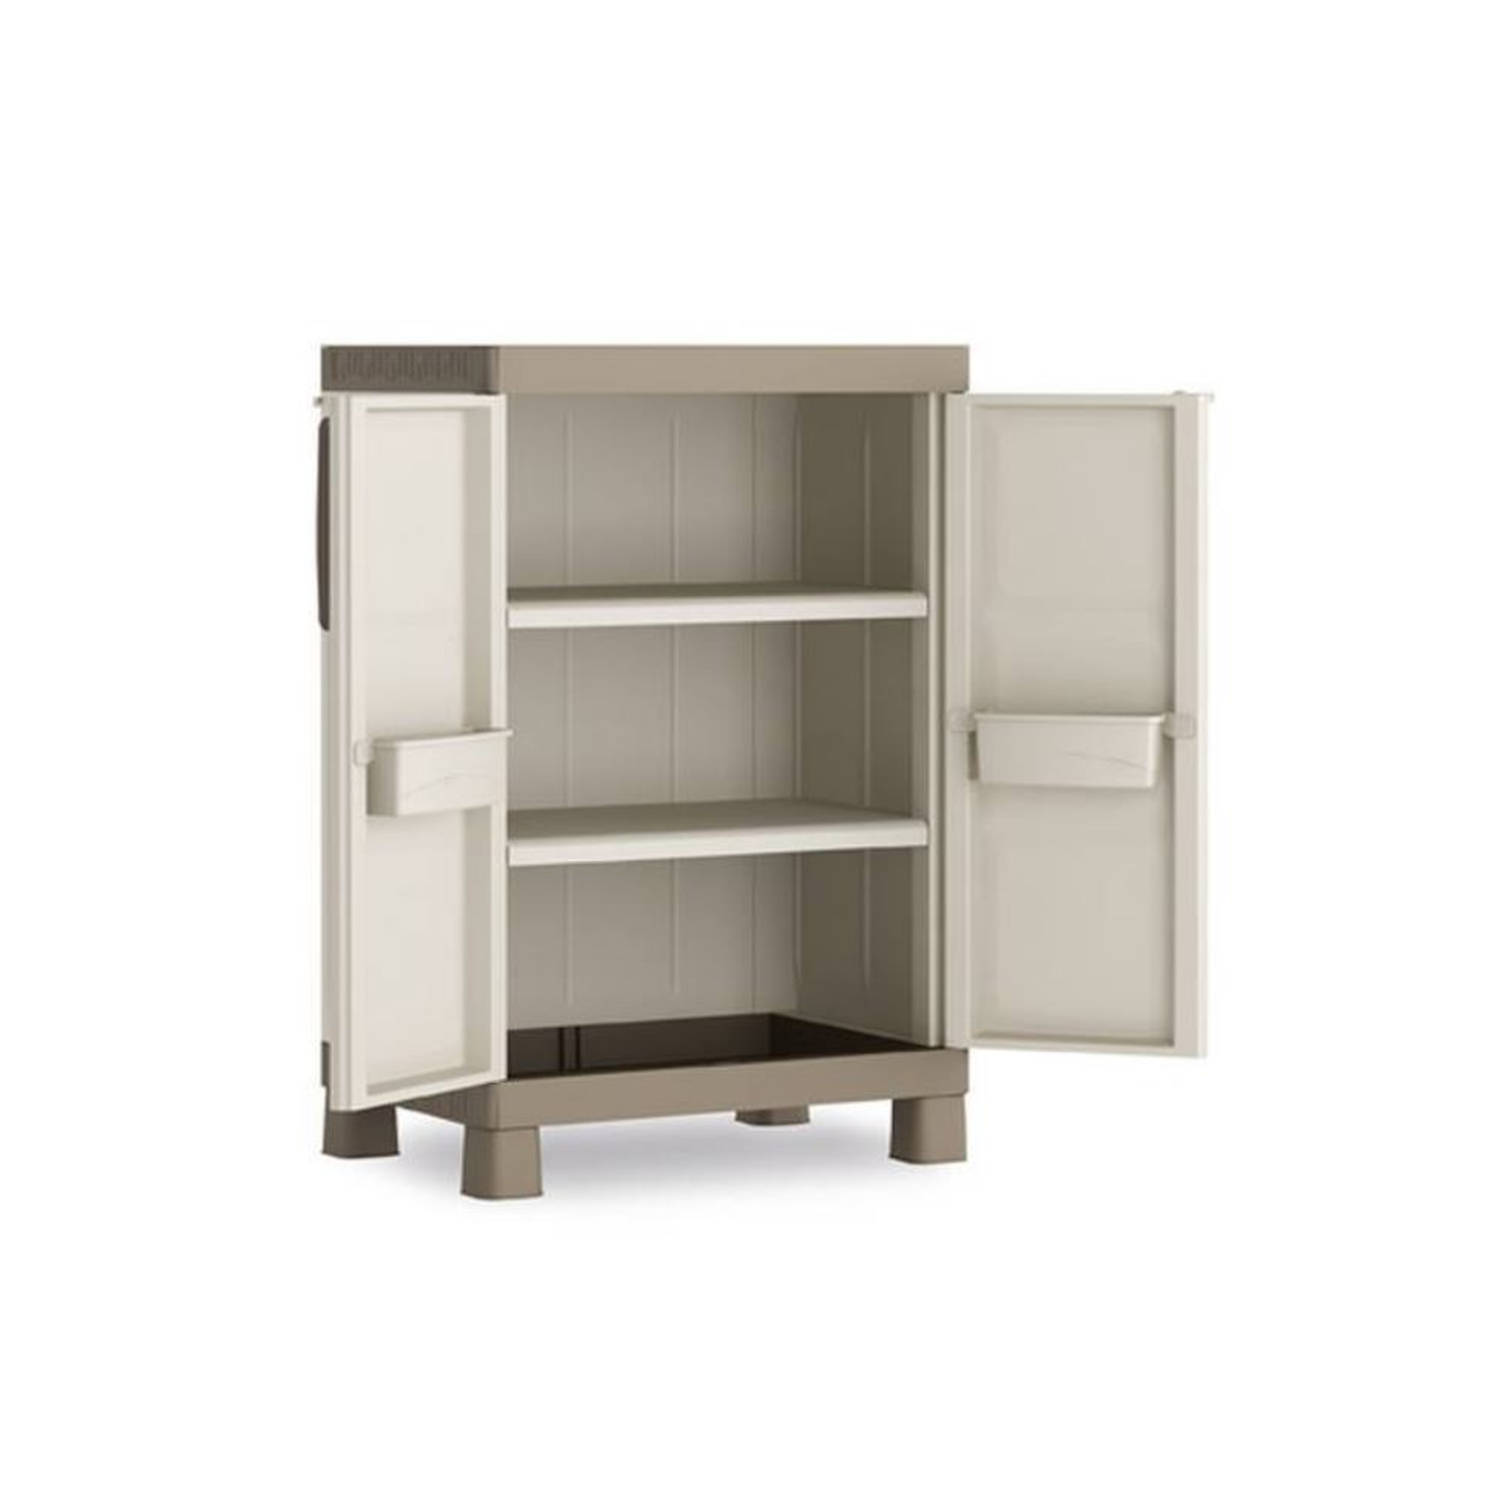 KIS Excellence Low Cabinet